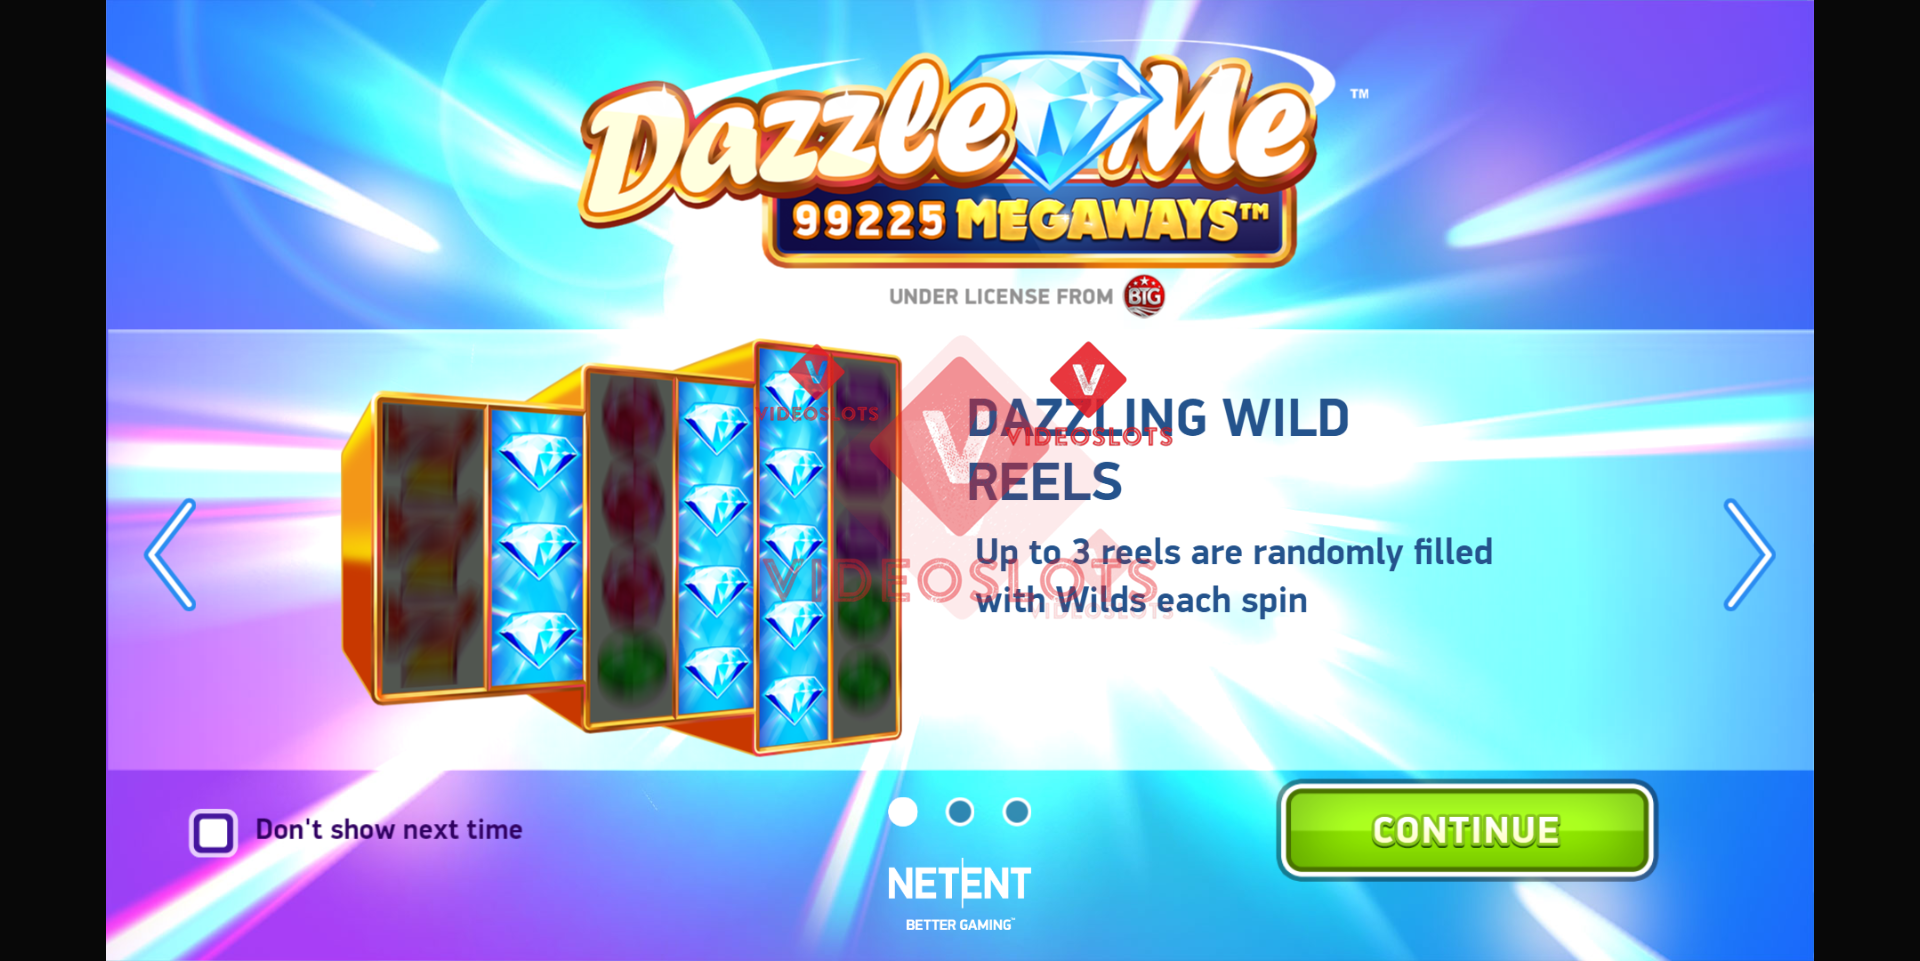 Game Intro for Dazzle Me Megaways slot from NetEnt